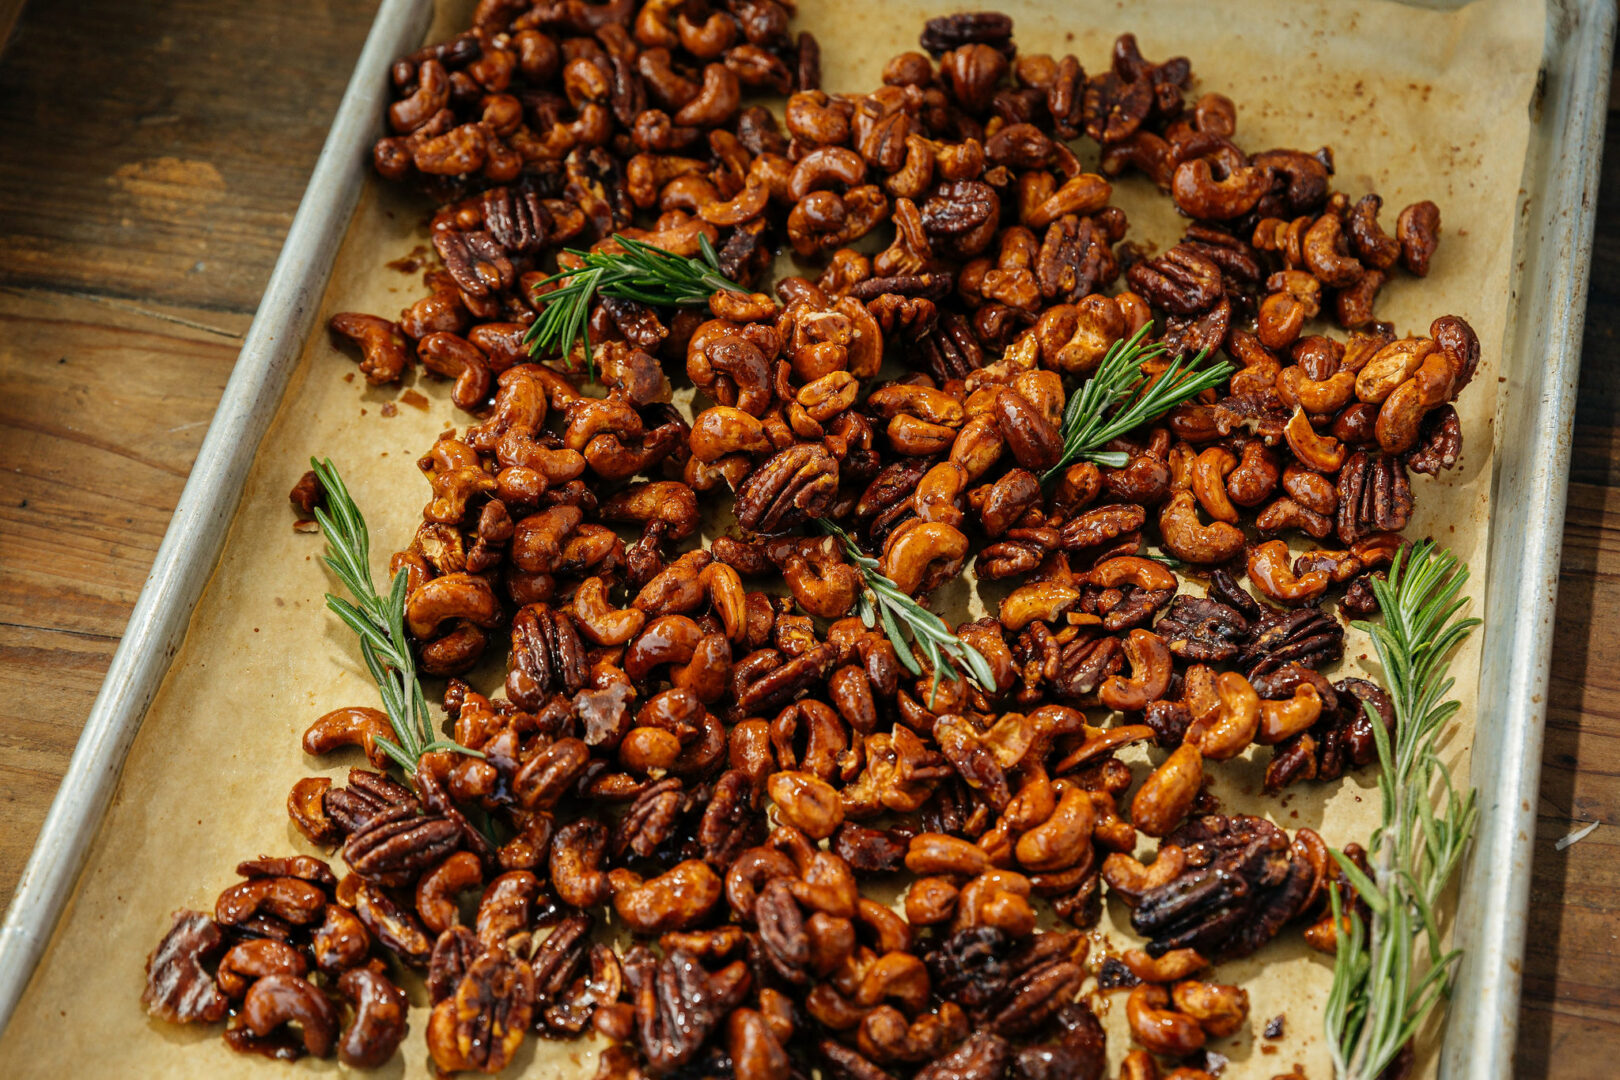 ROSEMARY & CHIPOTLE ROASTED NUTS